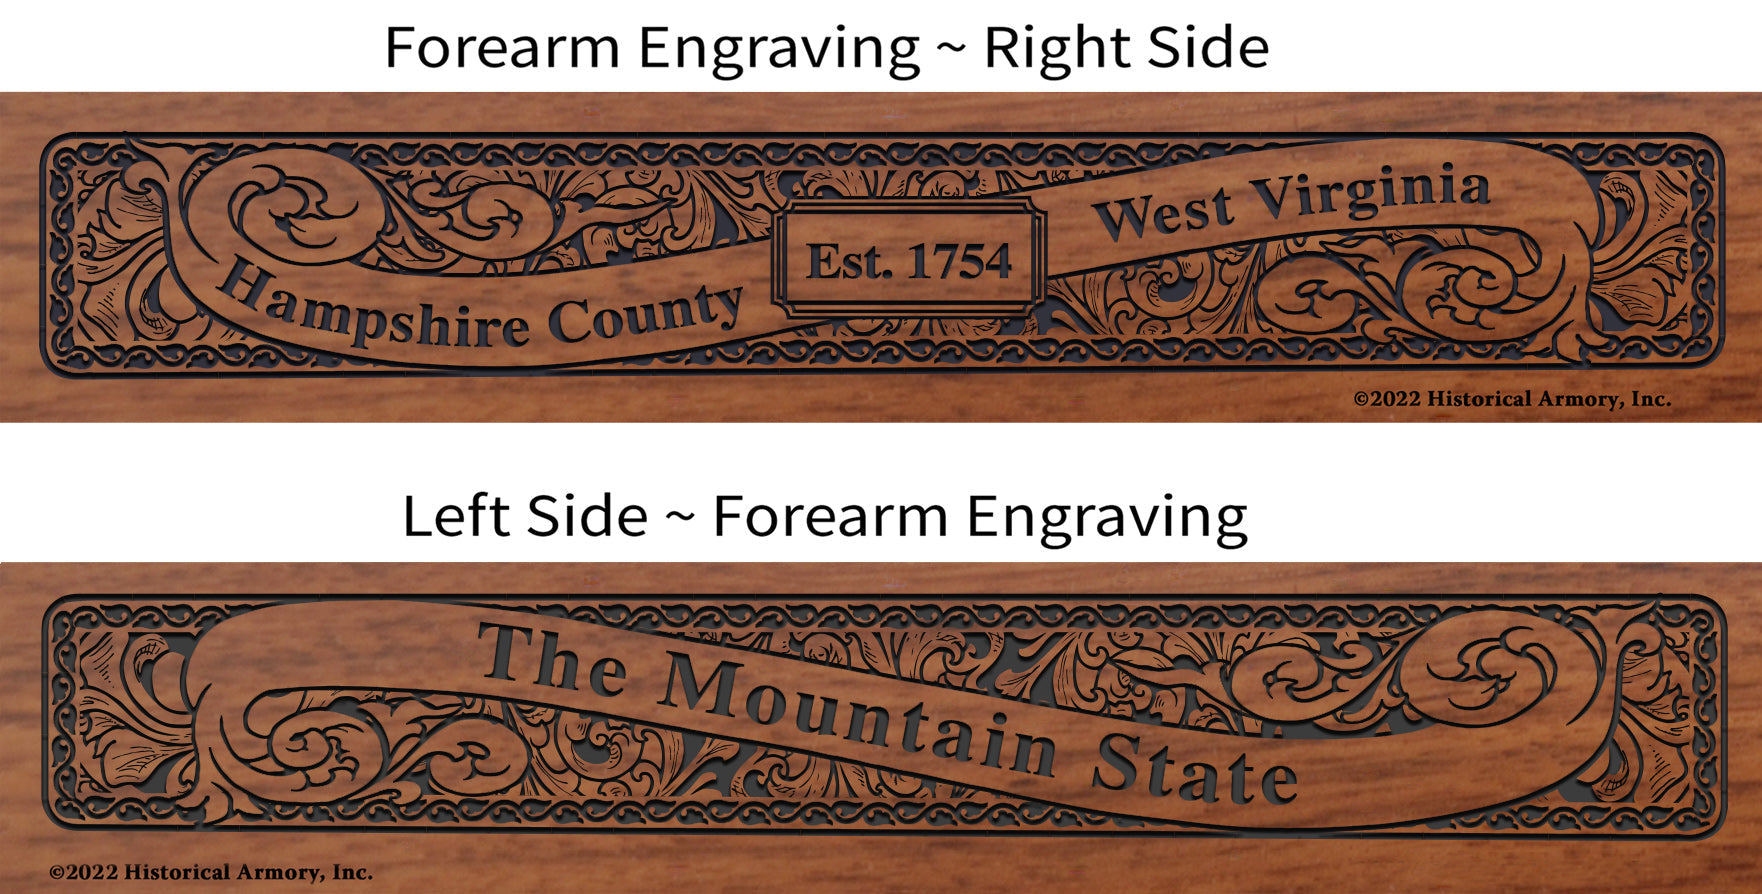 Hampshire County West Virginia Engraved Rifle Forearm